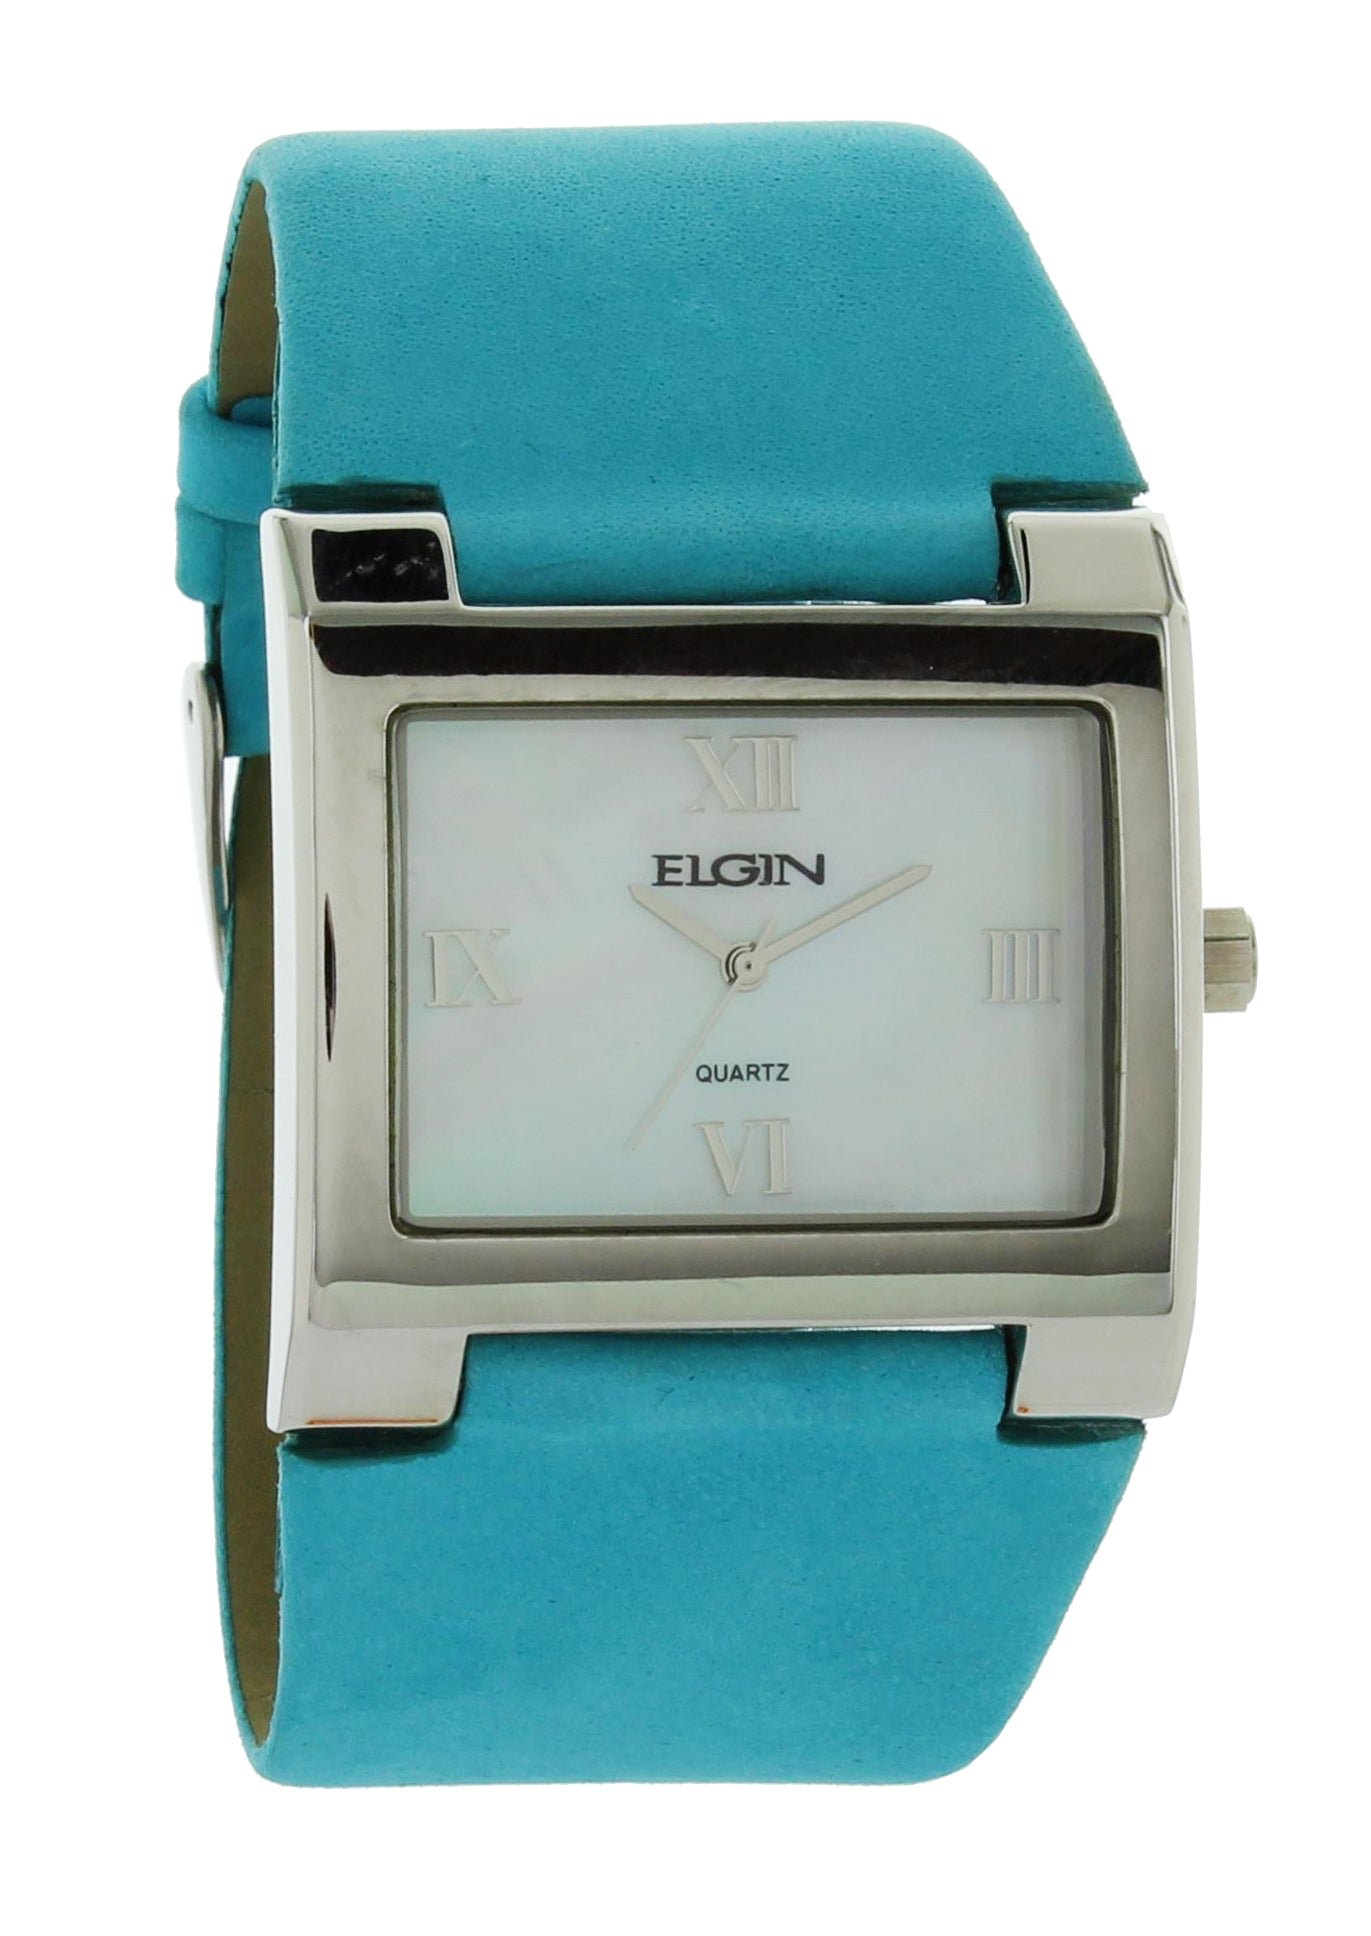 Model: Women's Elgin Watch with Stone Case and White Dial with Light Blue Leather Strap